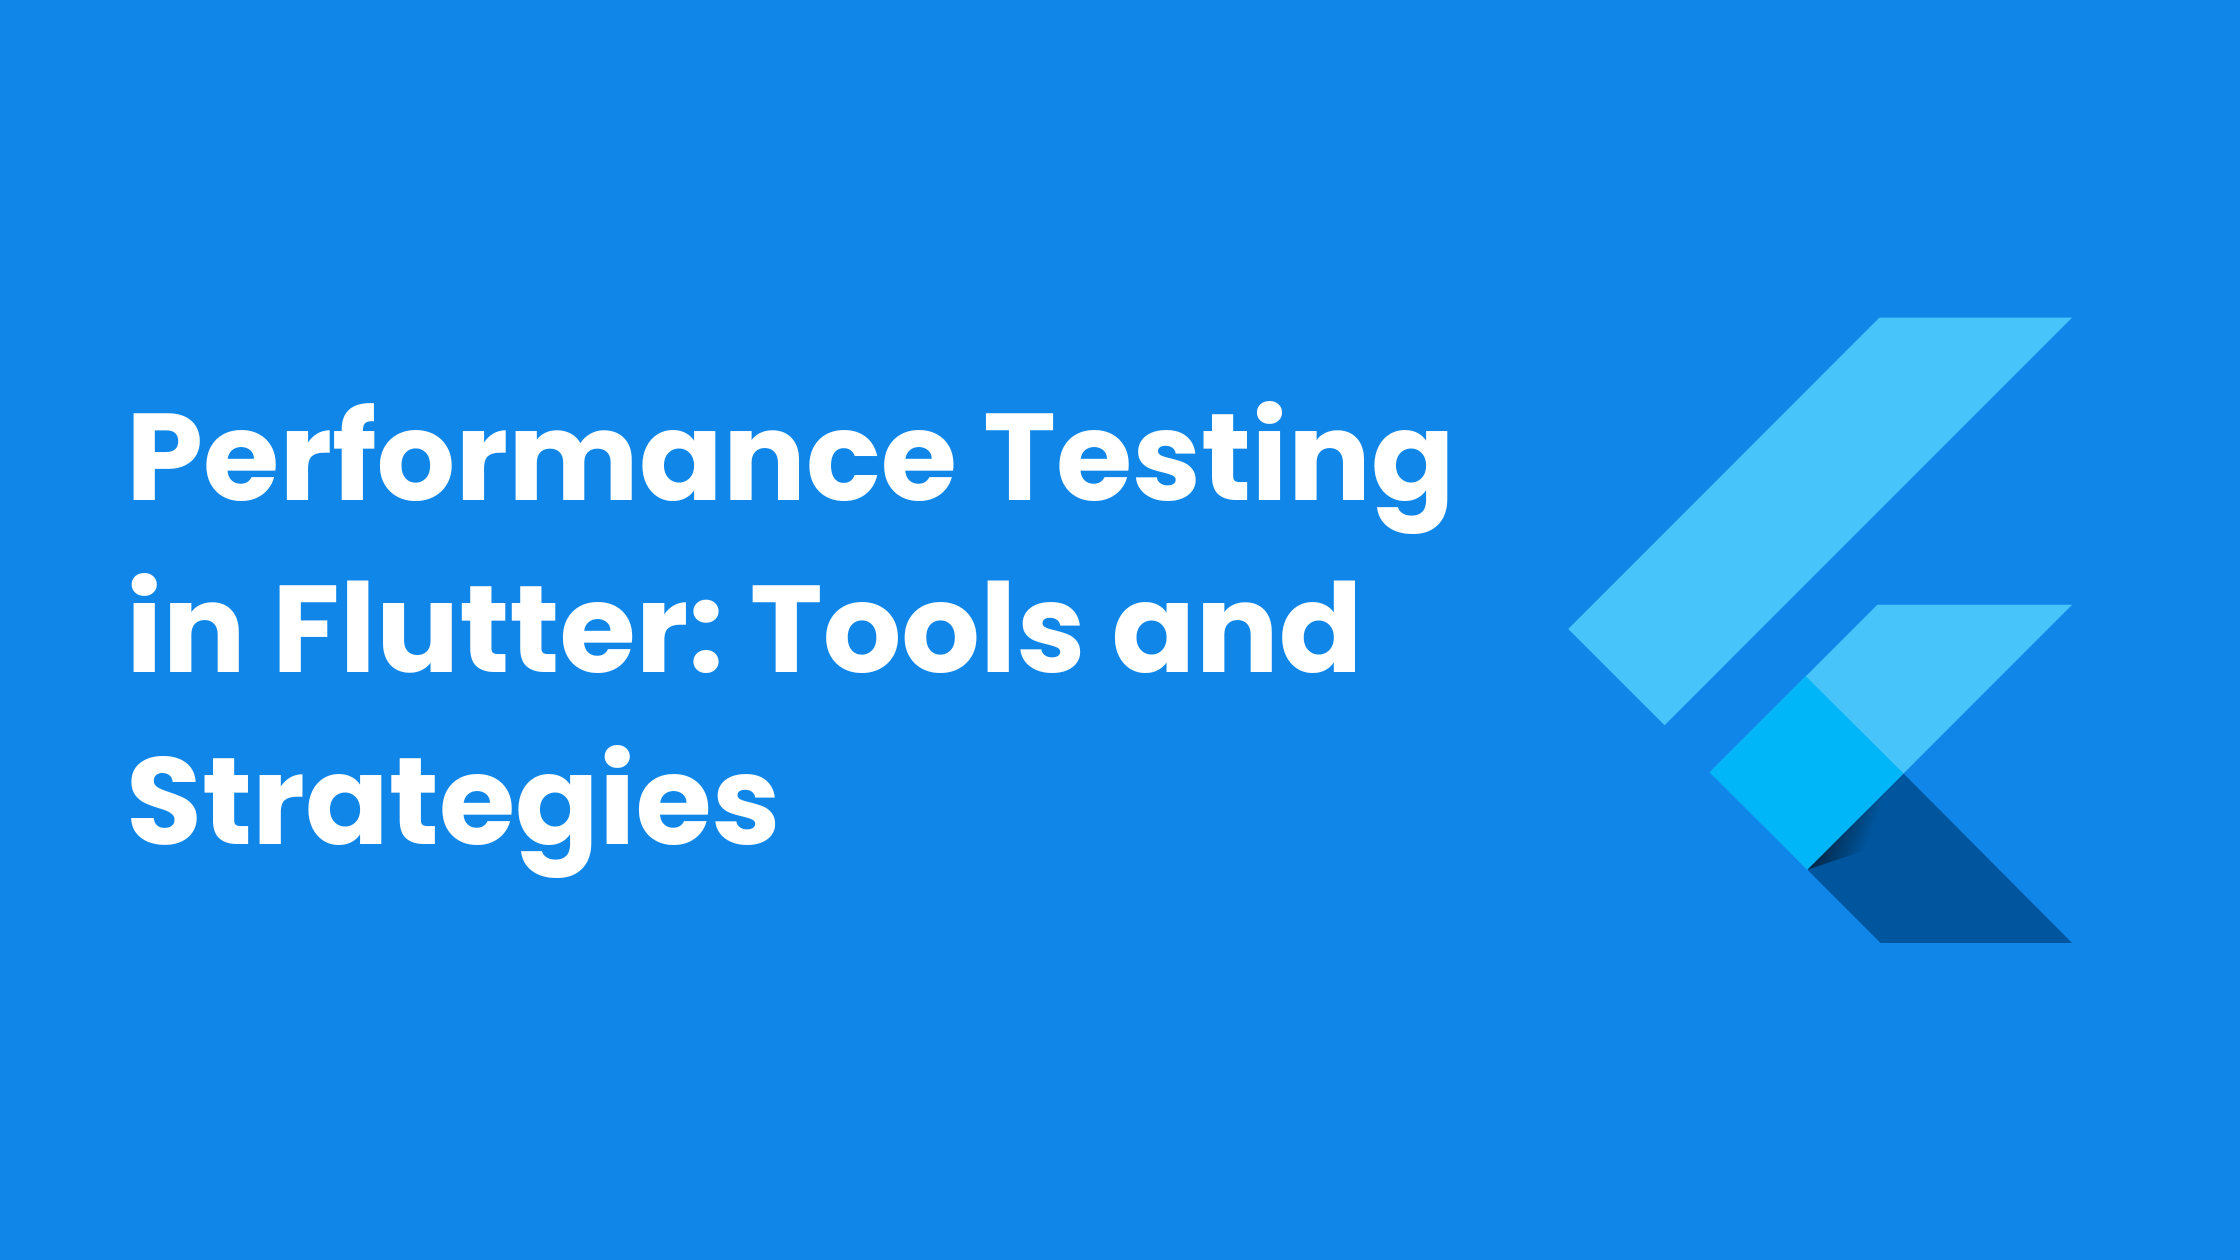 Performance Testing in Flutter: Tools and Strategies